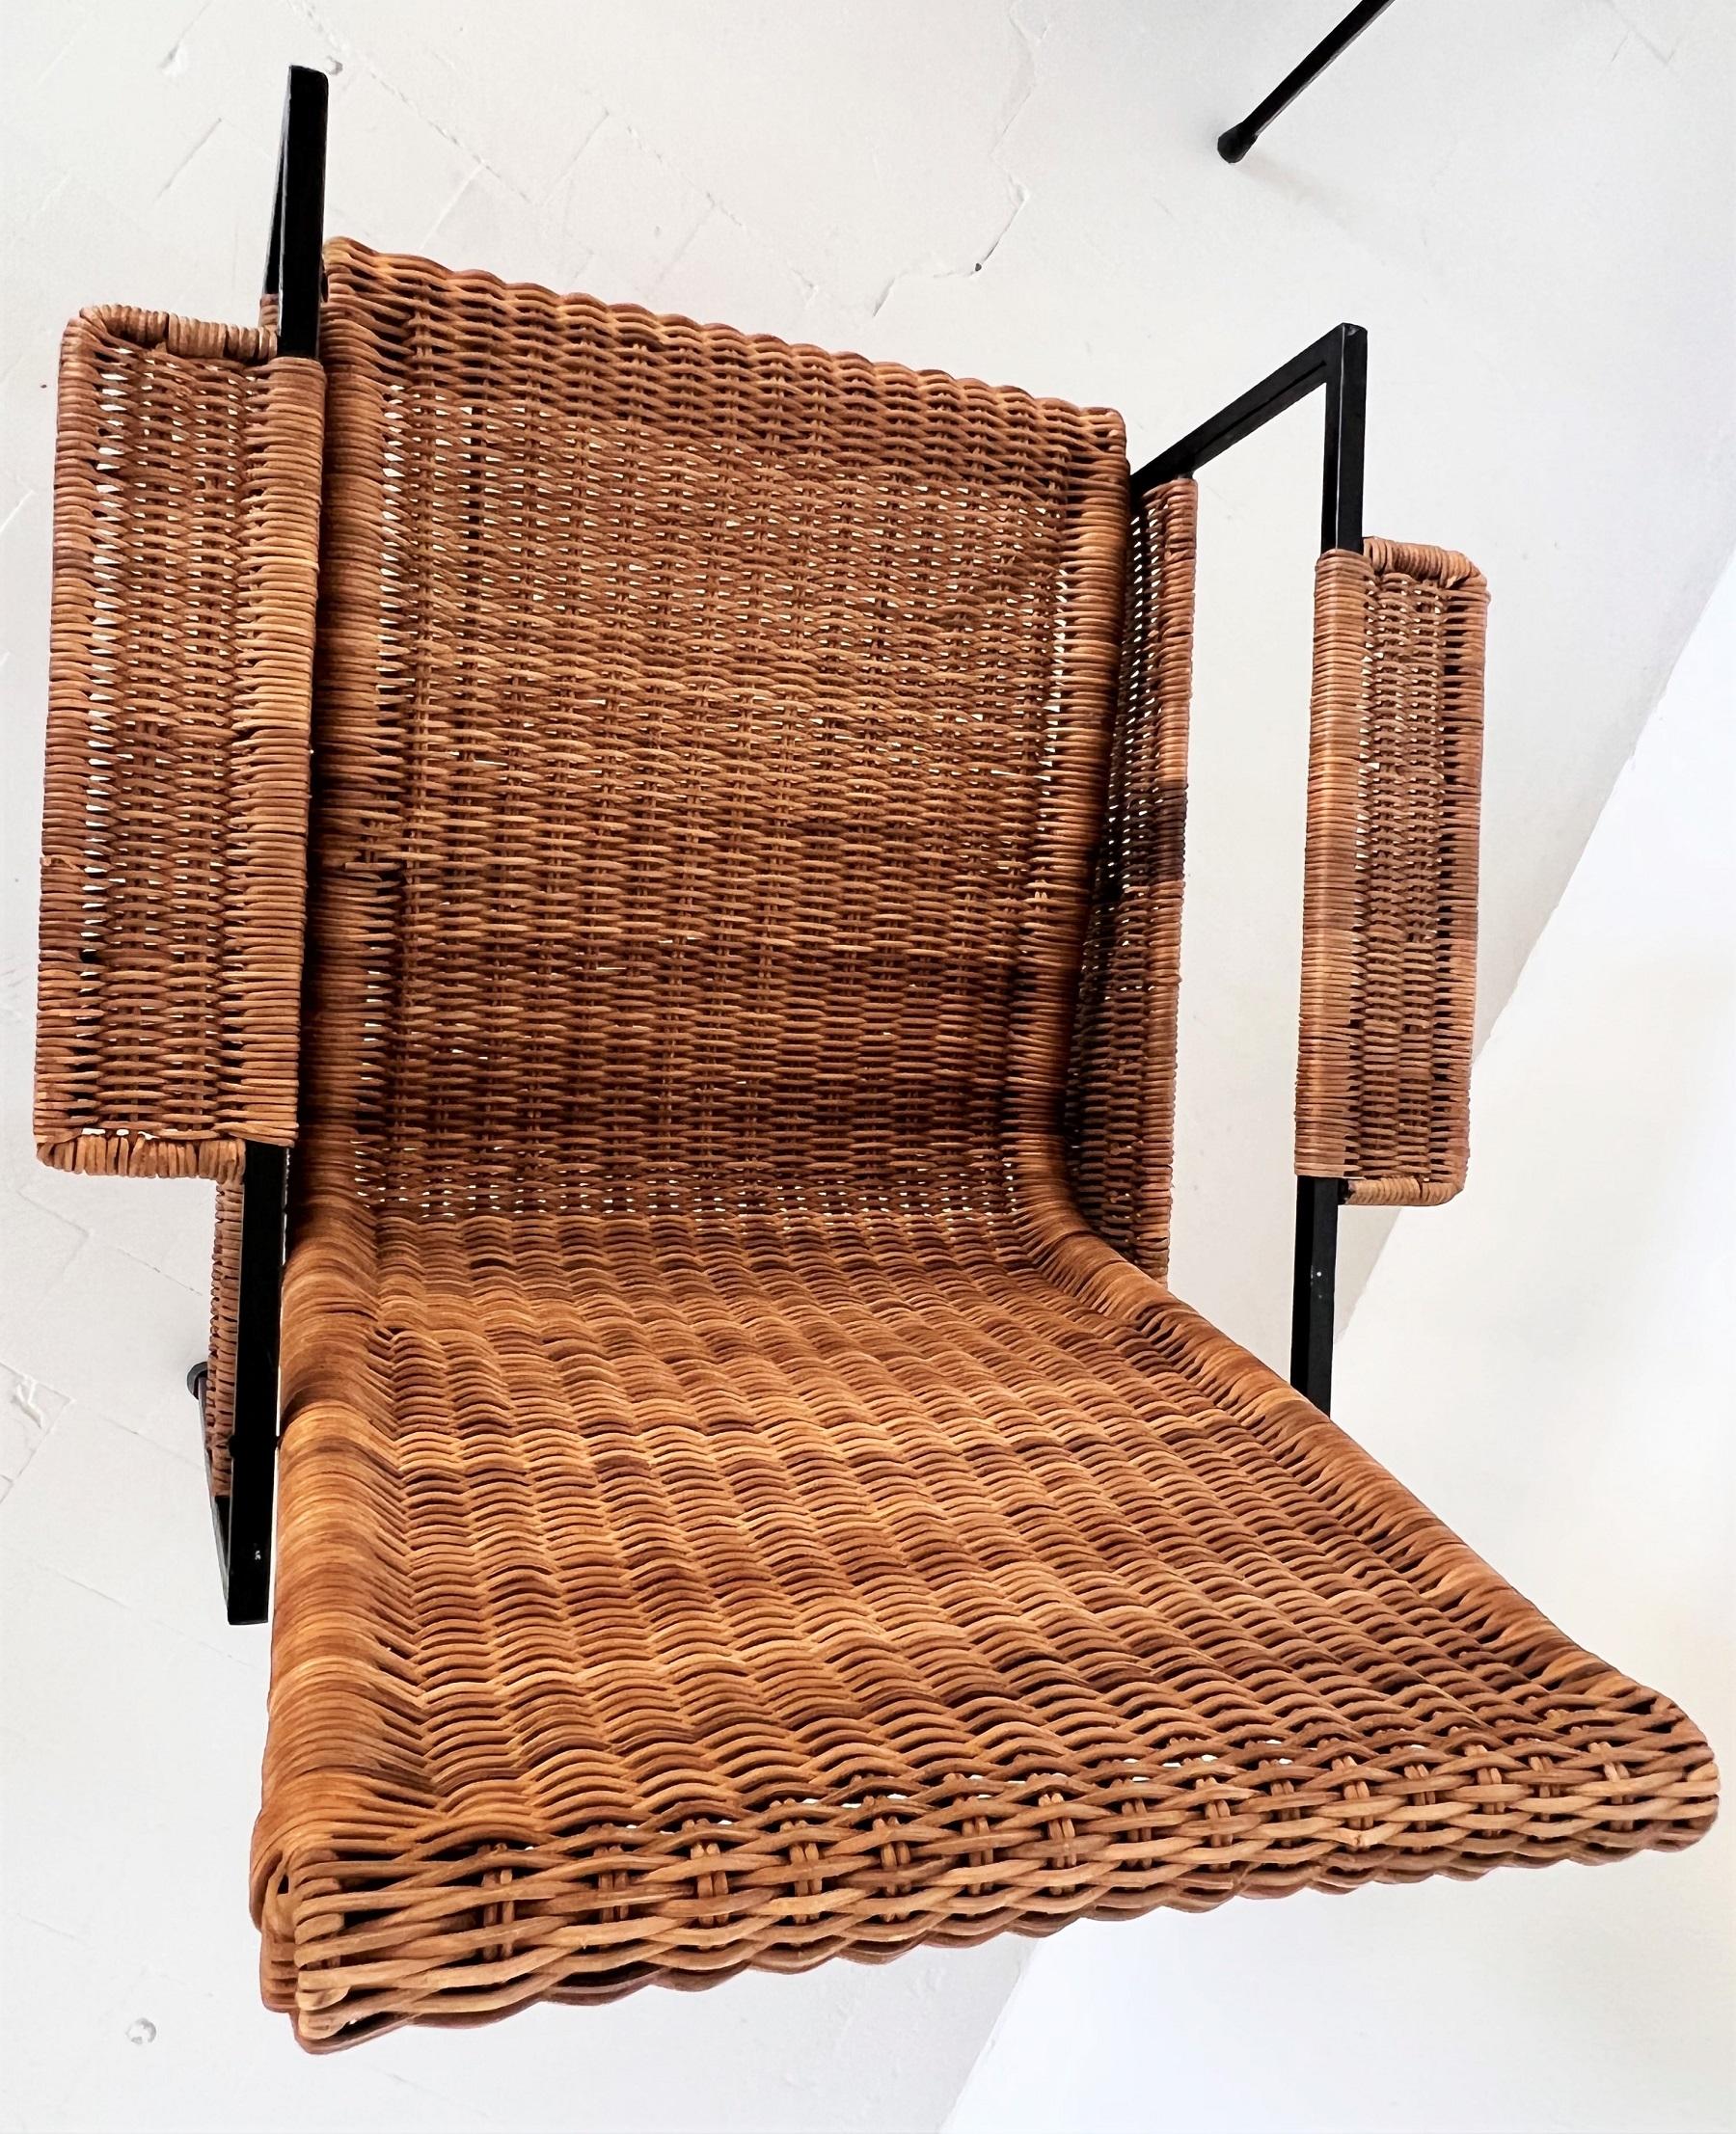 Italian Comfortable Midcentury Rattan Wicker and Iron Lounge Chairs, set of 4 For Sale 11